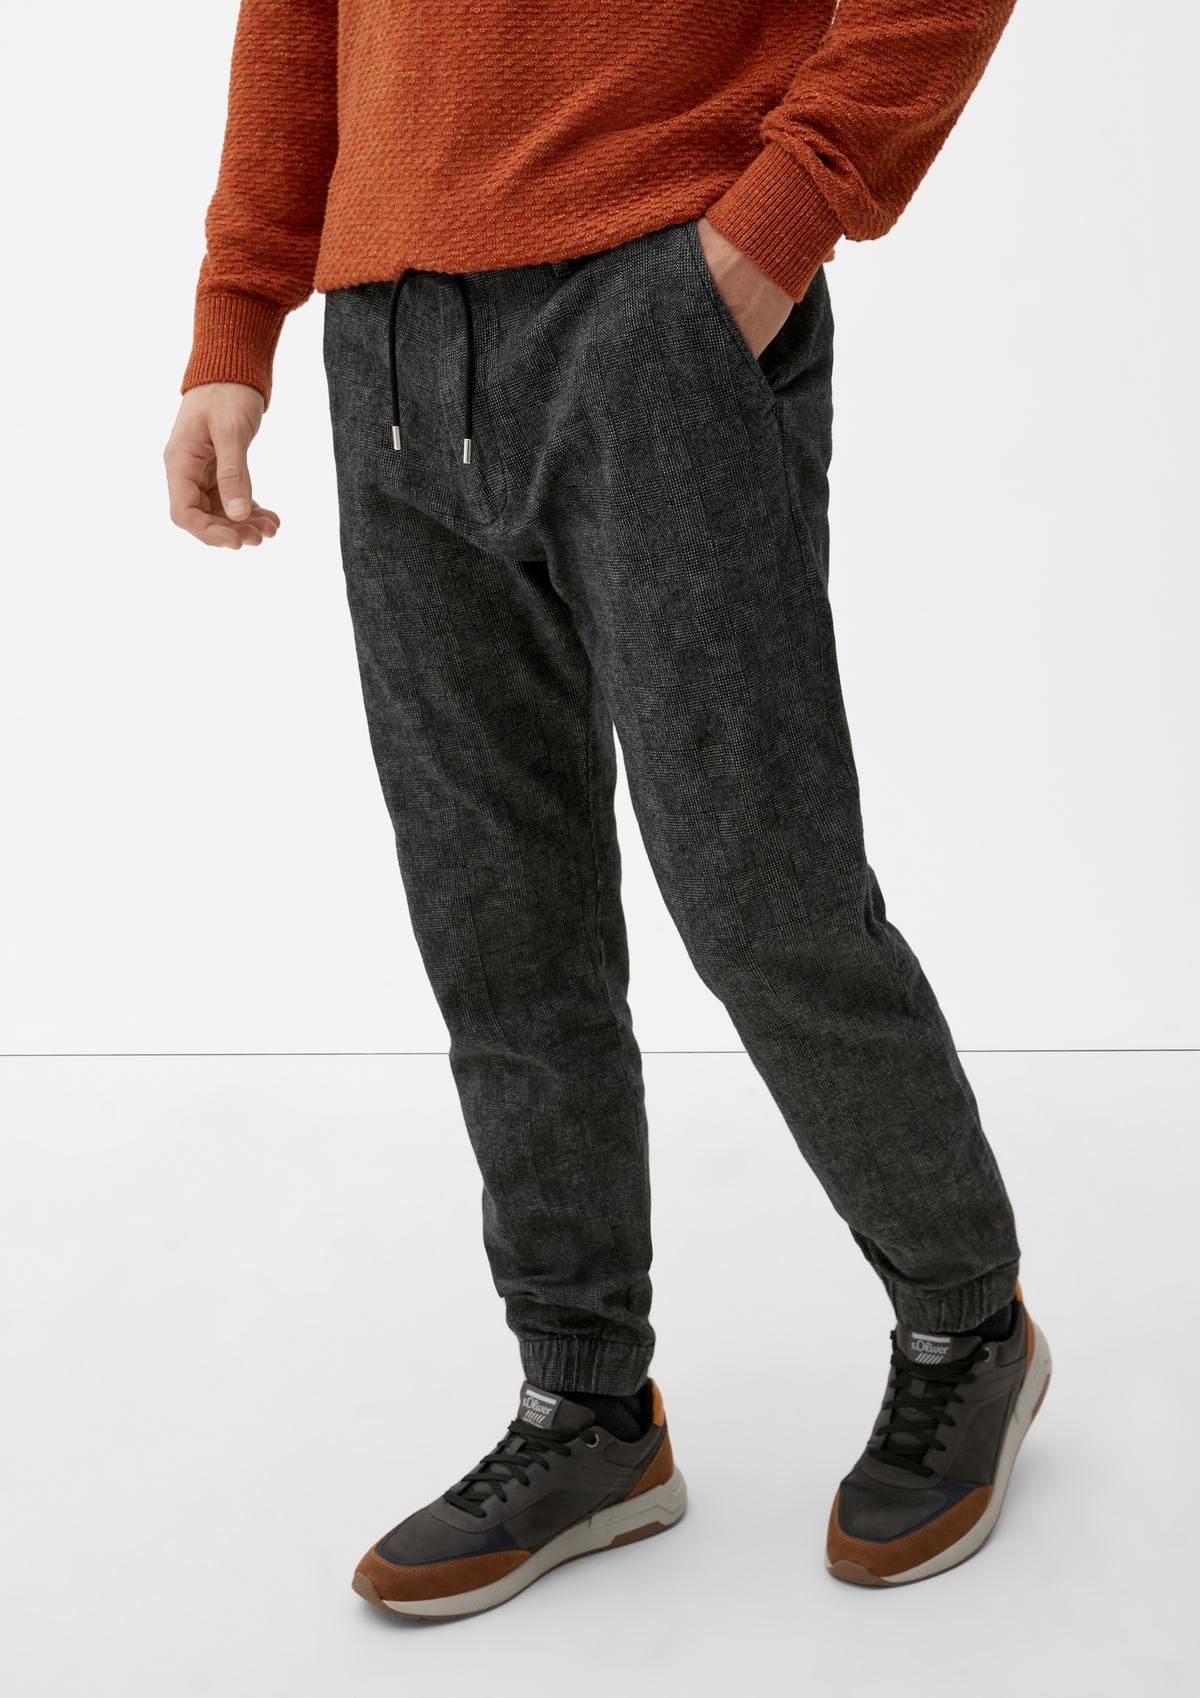 pattern Relaxed an fit: Oliver grey s. - all-over with dark tracksuit bottoms |